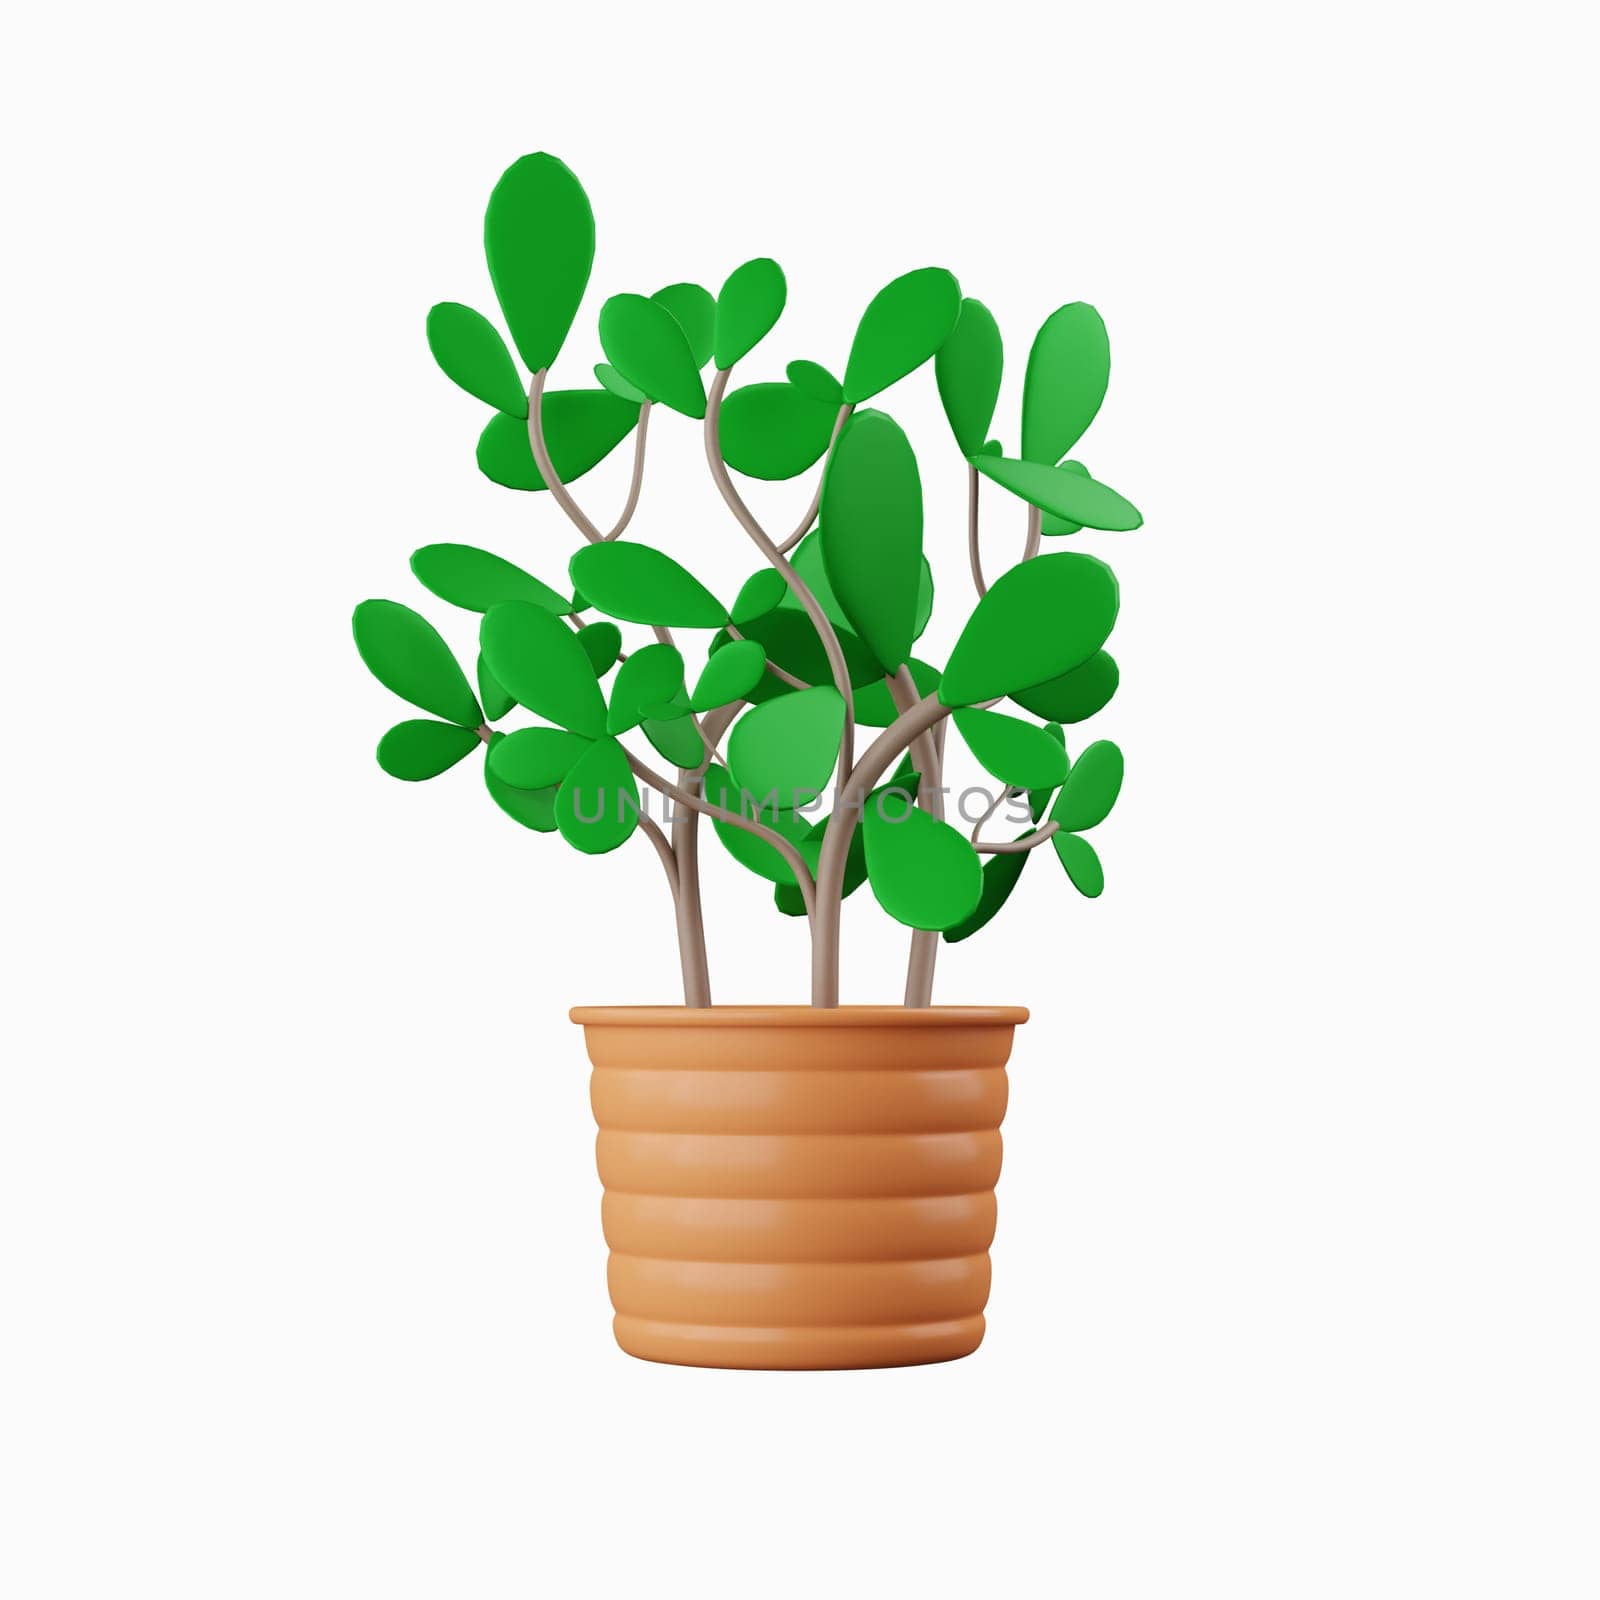 3d plant in plant pot. Floral arrangement garland. icon isolated on white background. 3d rendering illustration. Clipping path by meepiangraphic